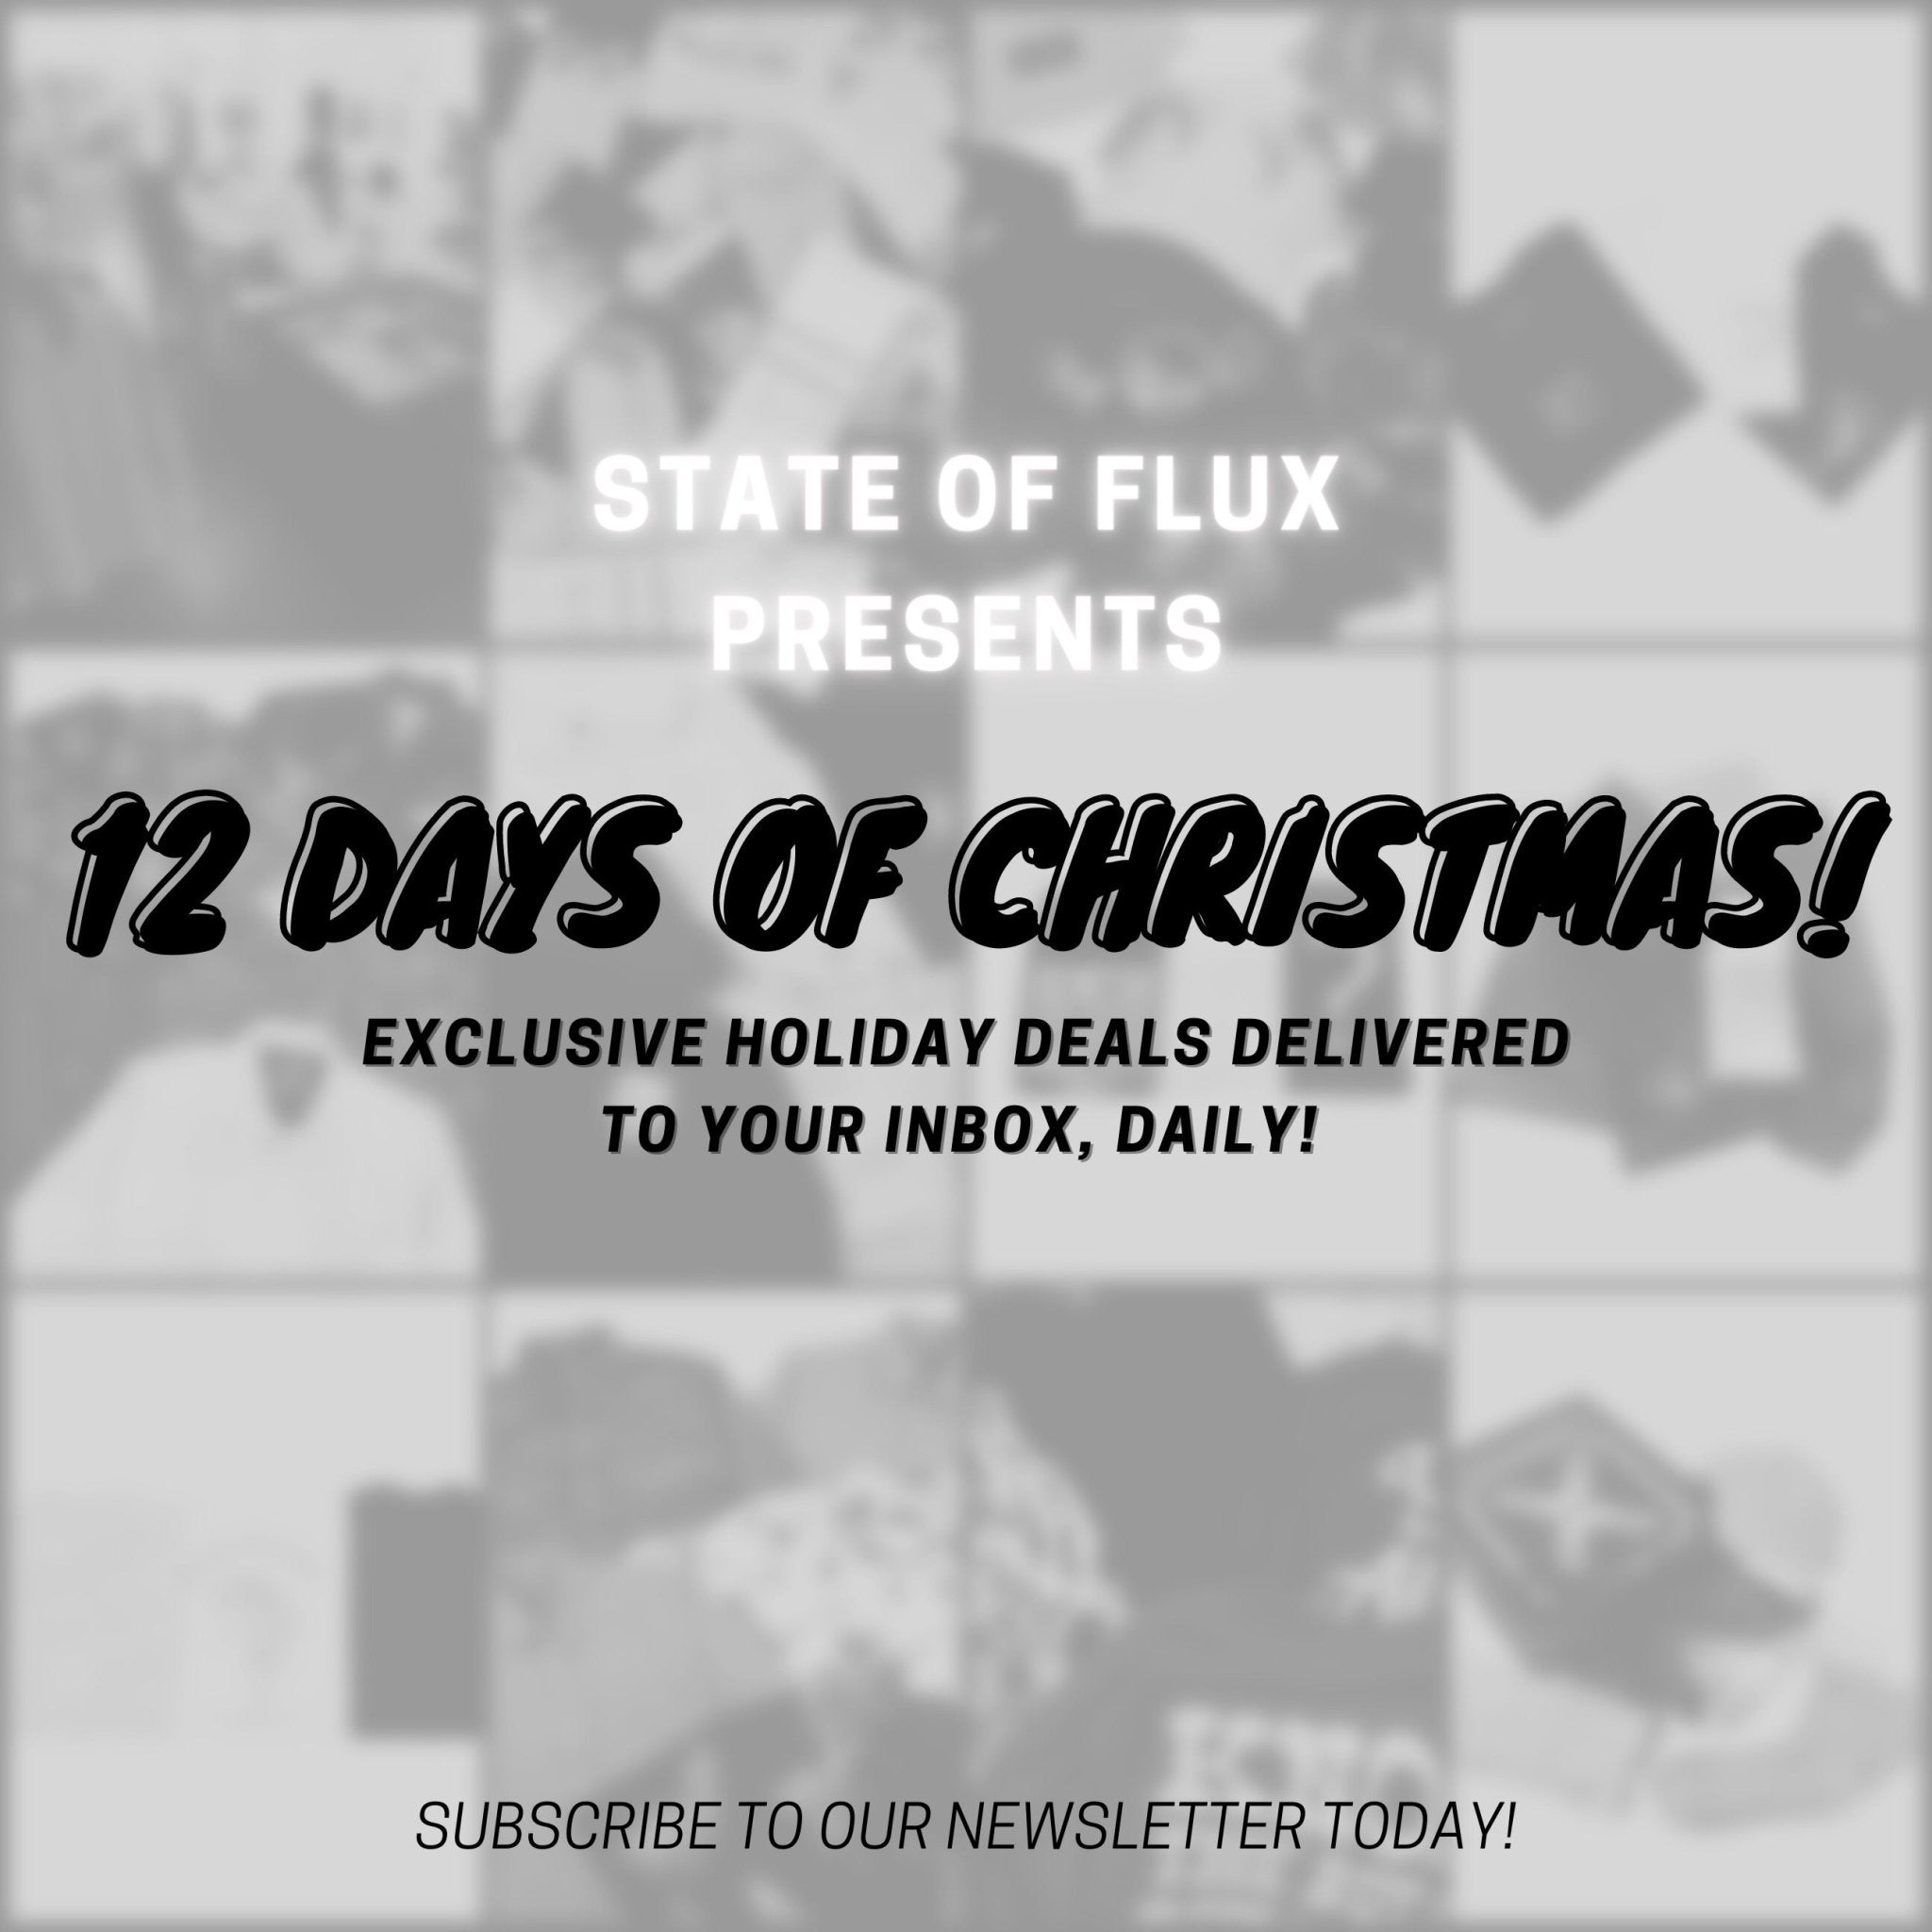 State Of Flux presents: 12 Days of Christmas!